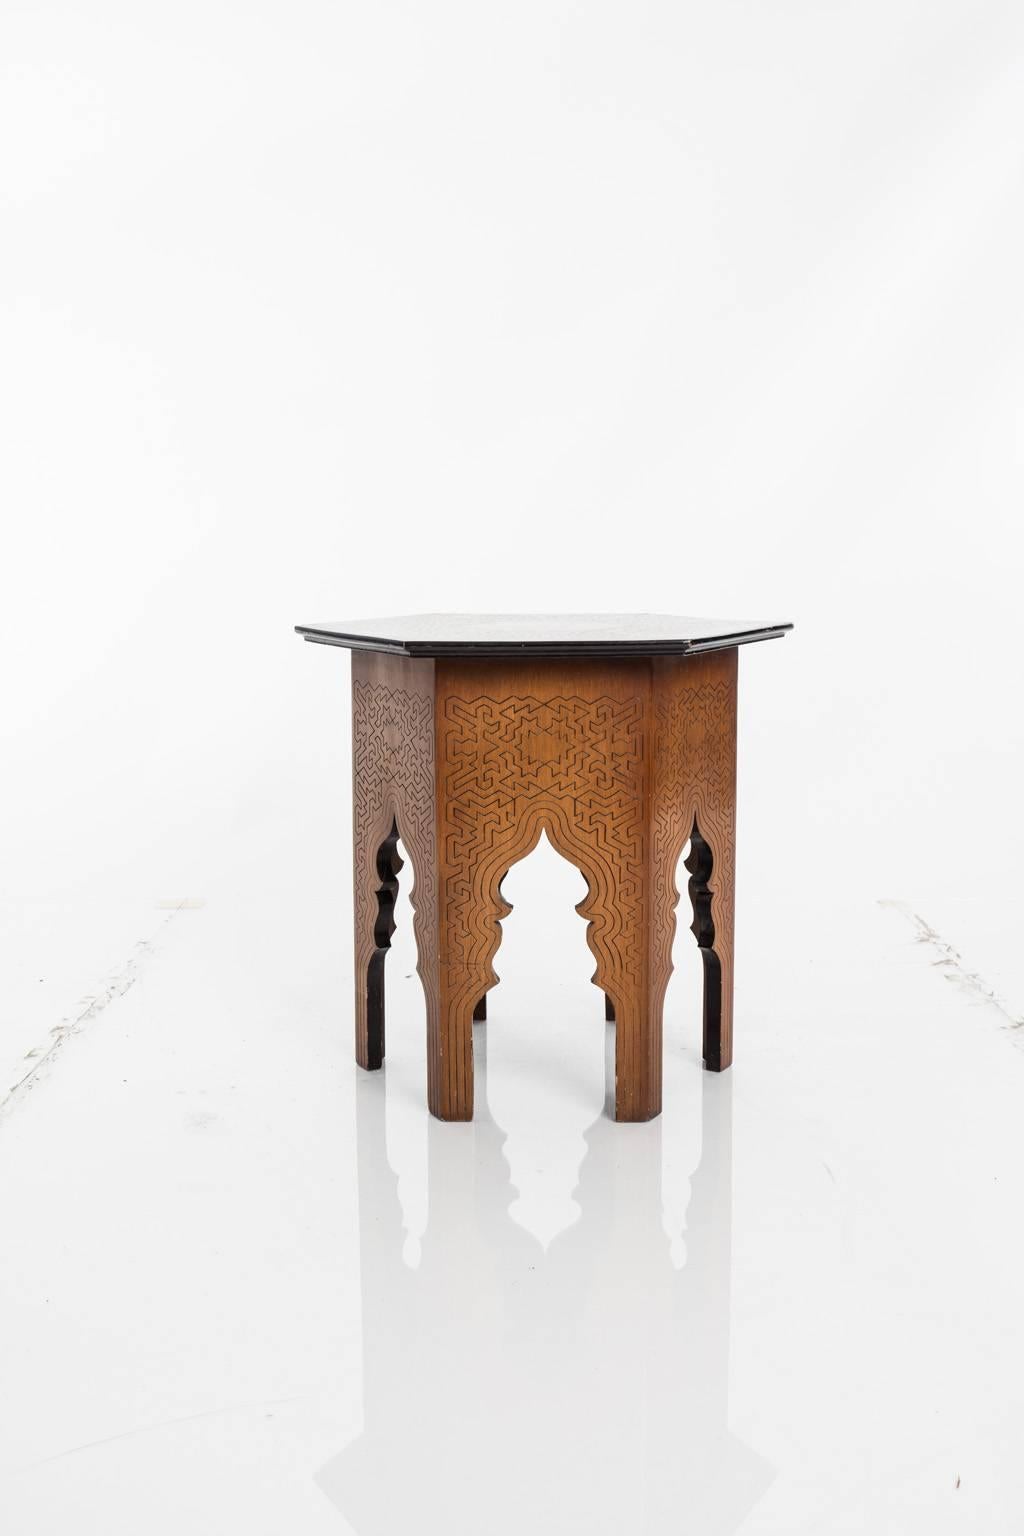 Hexagonal side table with geometric pattern motif throughout.